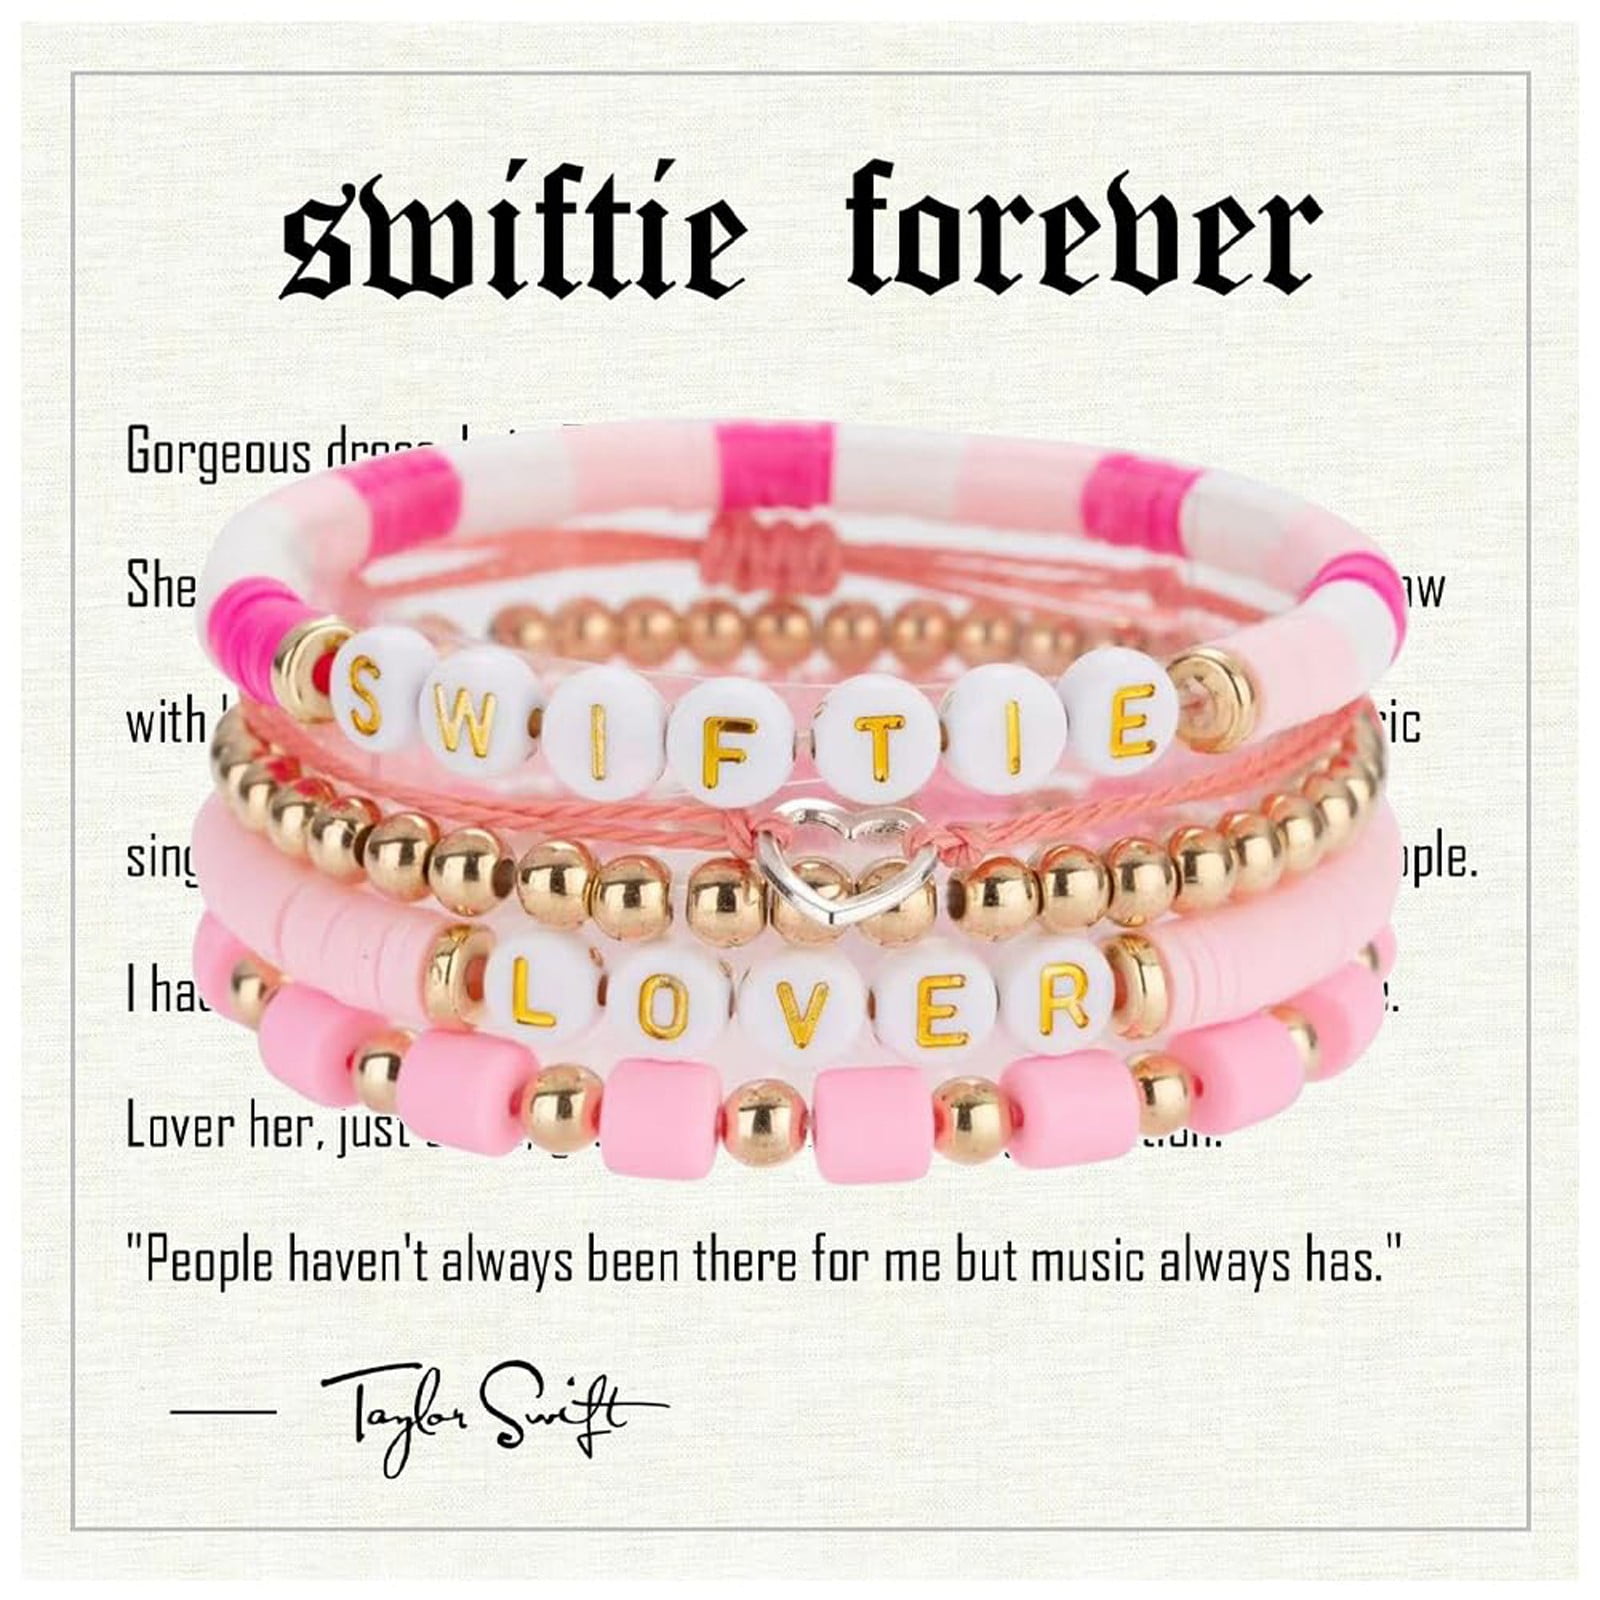 How to make and trade Taylor Swift friendship bracelets - Los Angeles Times